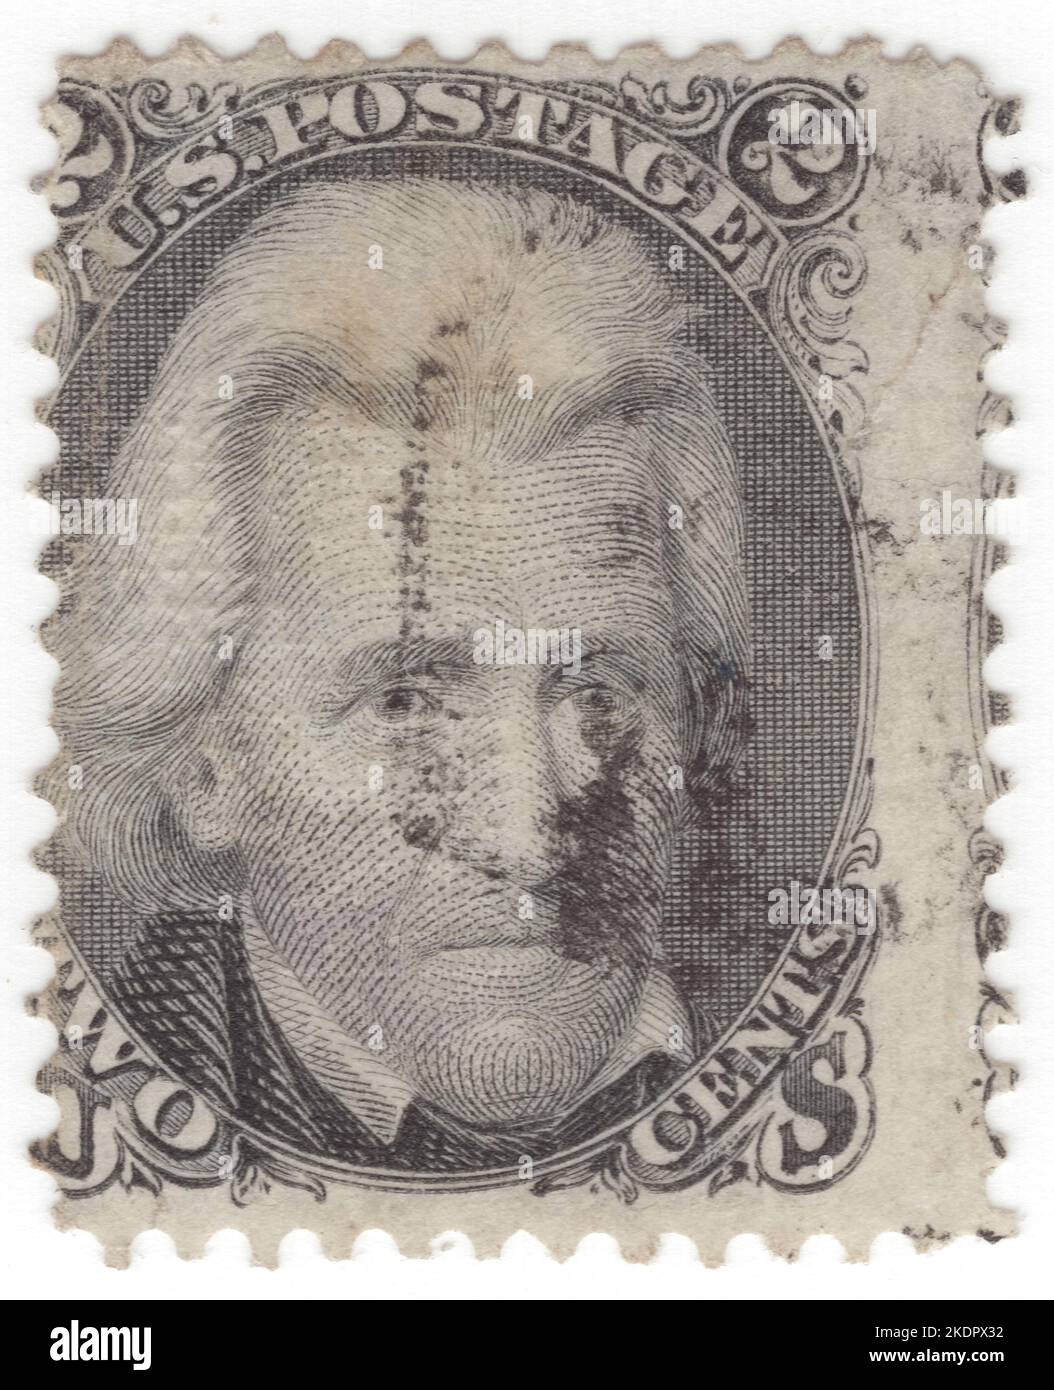 USA - 1861: An 2 cents black postage stamp depicting portrait of Andrew Jackson. American lawyer, planter, general, and statesman who served as the seventh president of the United States from 1829 to 1837. Before being elected to the presidency, Jackson gained fame as a general in the United States Army and served in both houses of the U.S. Congress. Although often praised as an advocate for ordinary Americans and for his work in preserving the union of states, Jackson has also been criticized for his racial policies, particularly his treatment of Native Americans Stock Photo